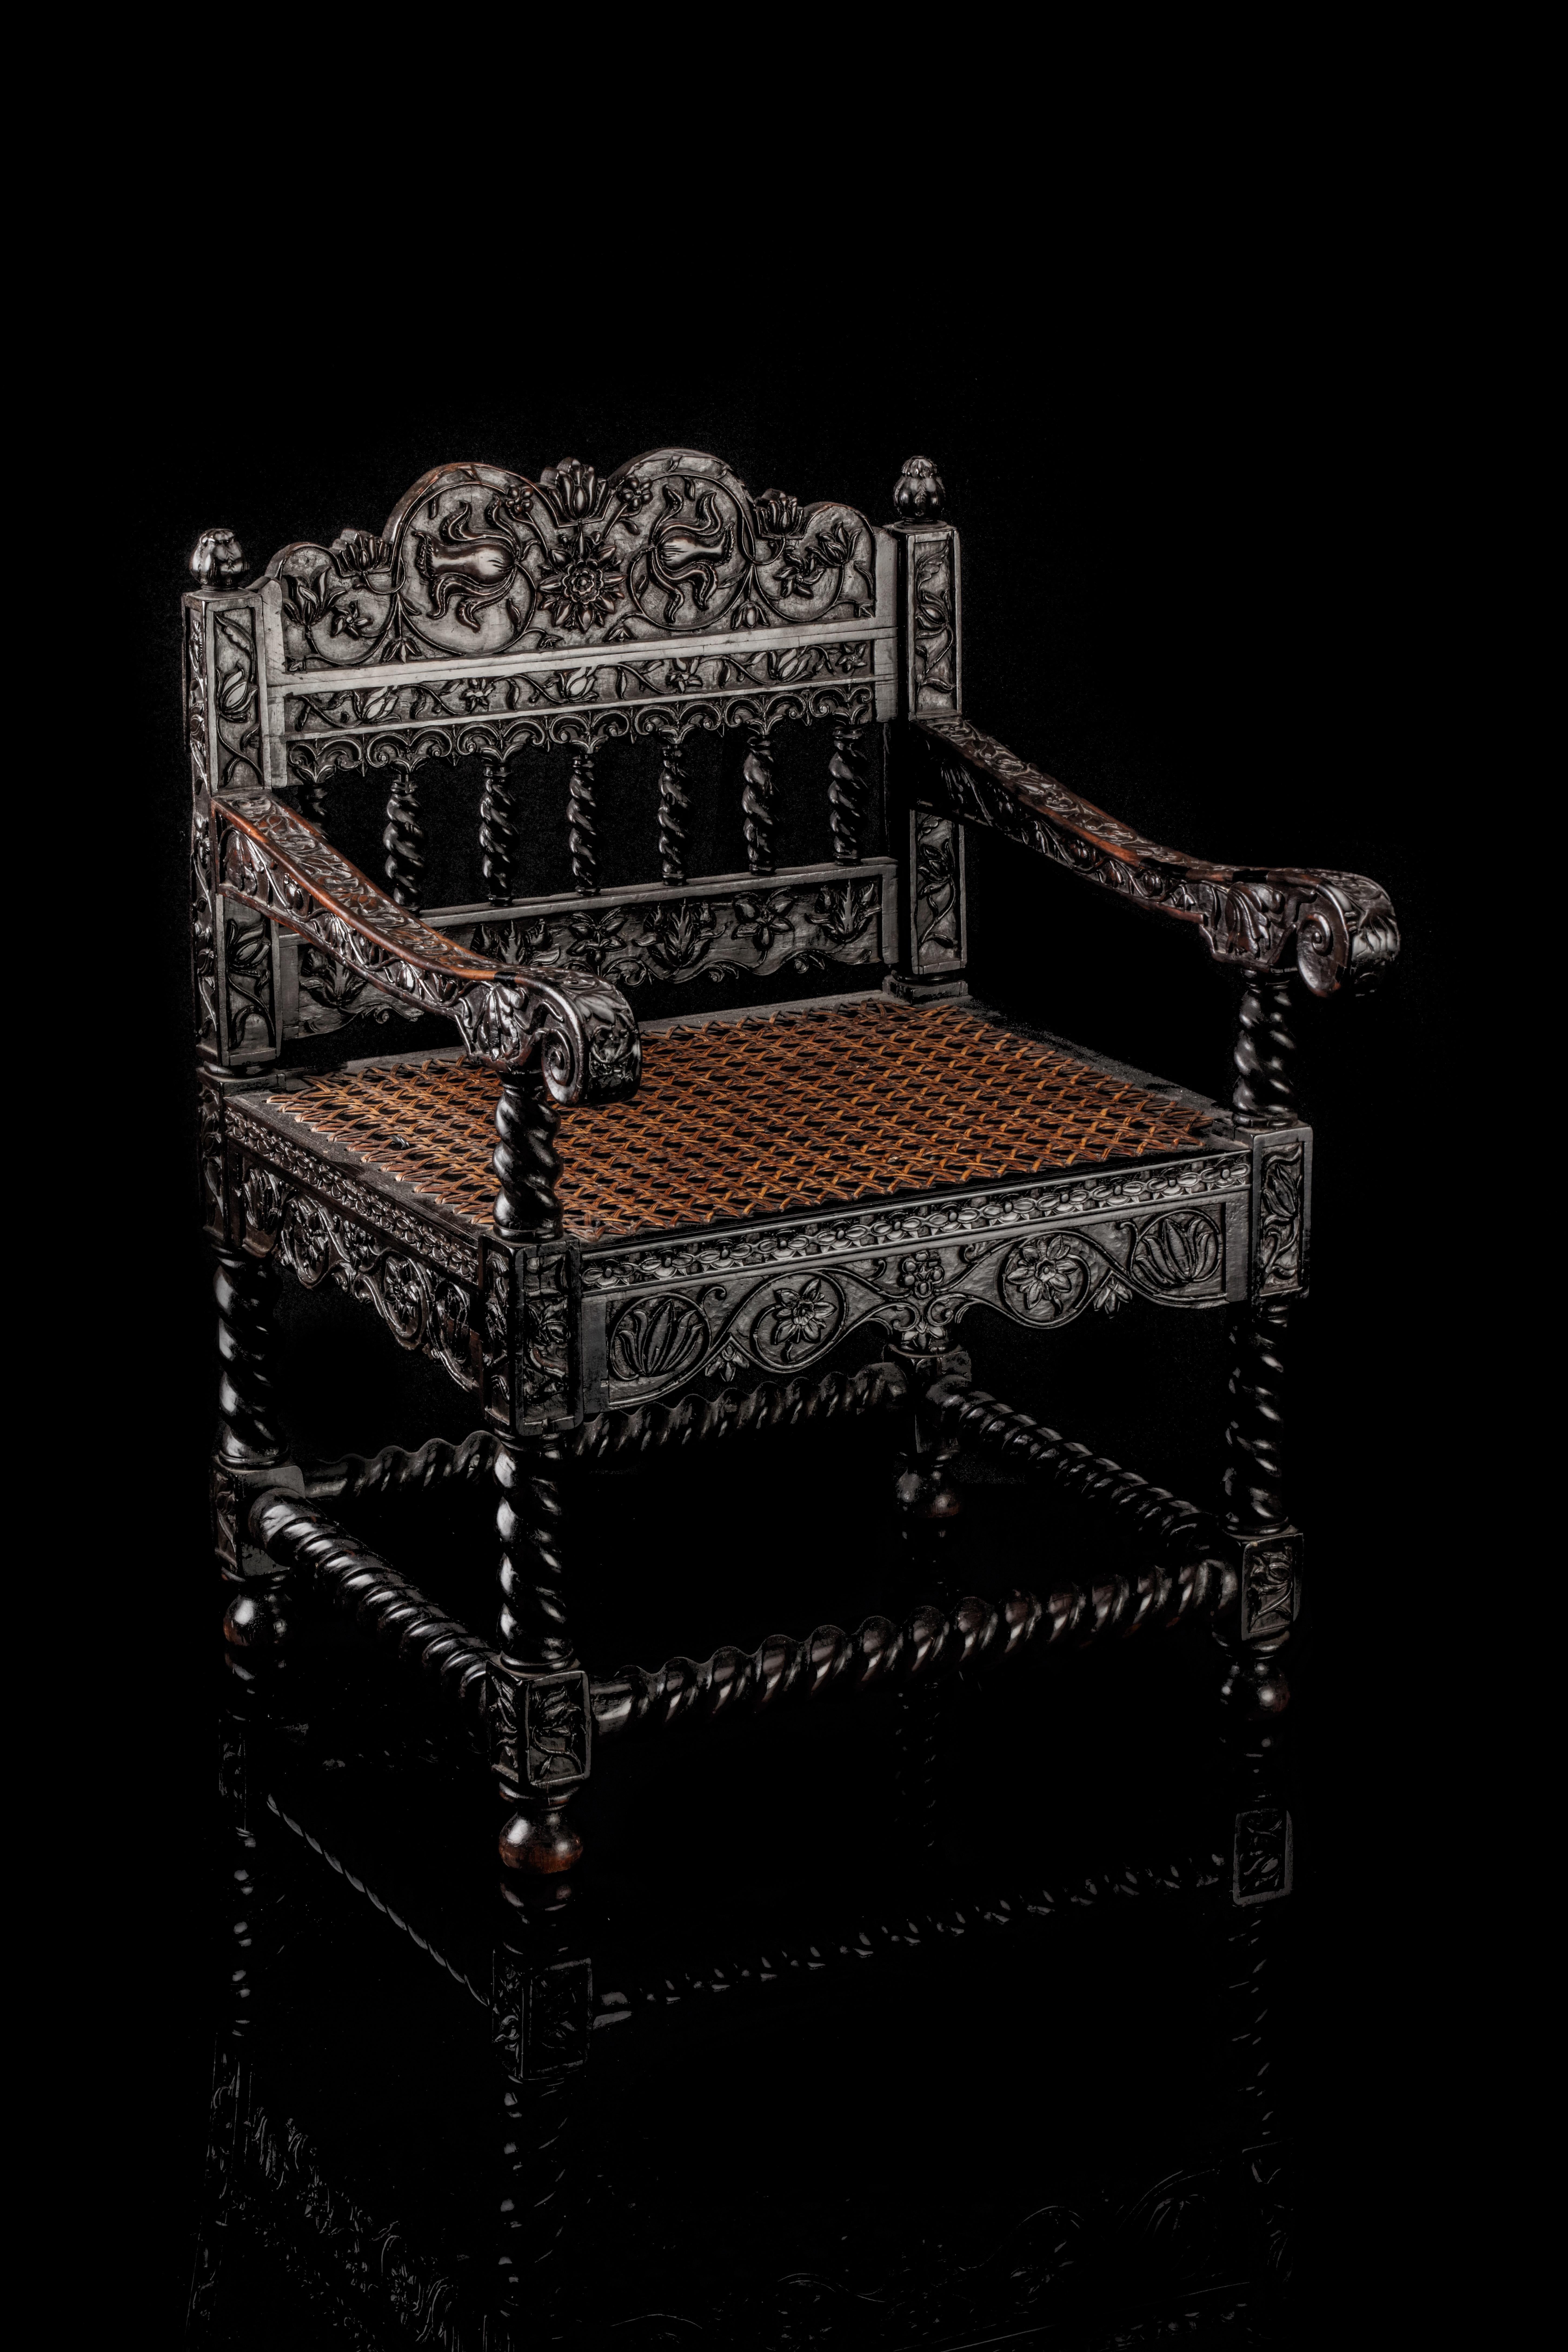 Probably Sri Lanka, 2nd half 17th century

H. 55 x W. 40.5 x D. 40.5 cm
Seat height 27.5 cm

The chair is overall densely carved with a scrolling flower motif on four connected turned legs and bun feet, with cane seating. Often, normal-sized